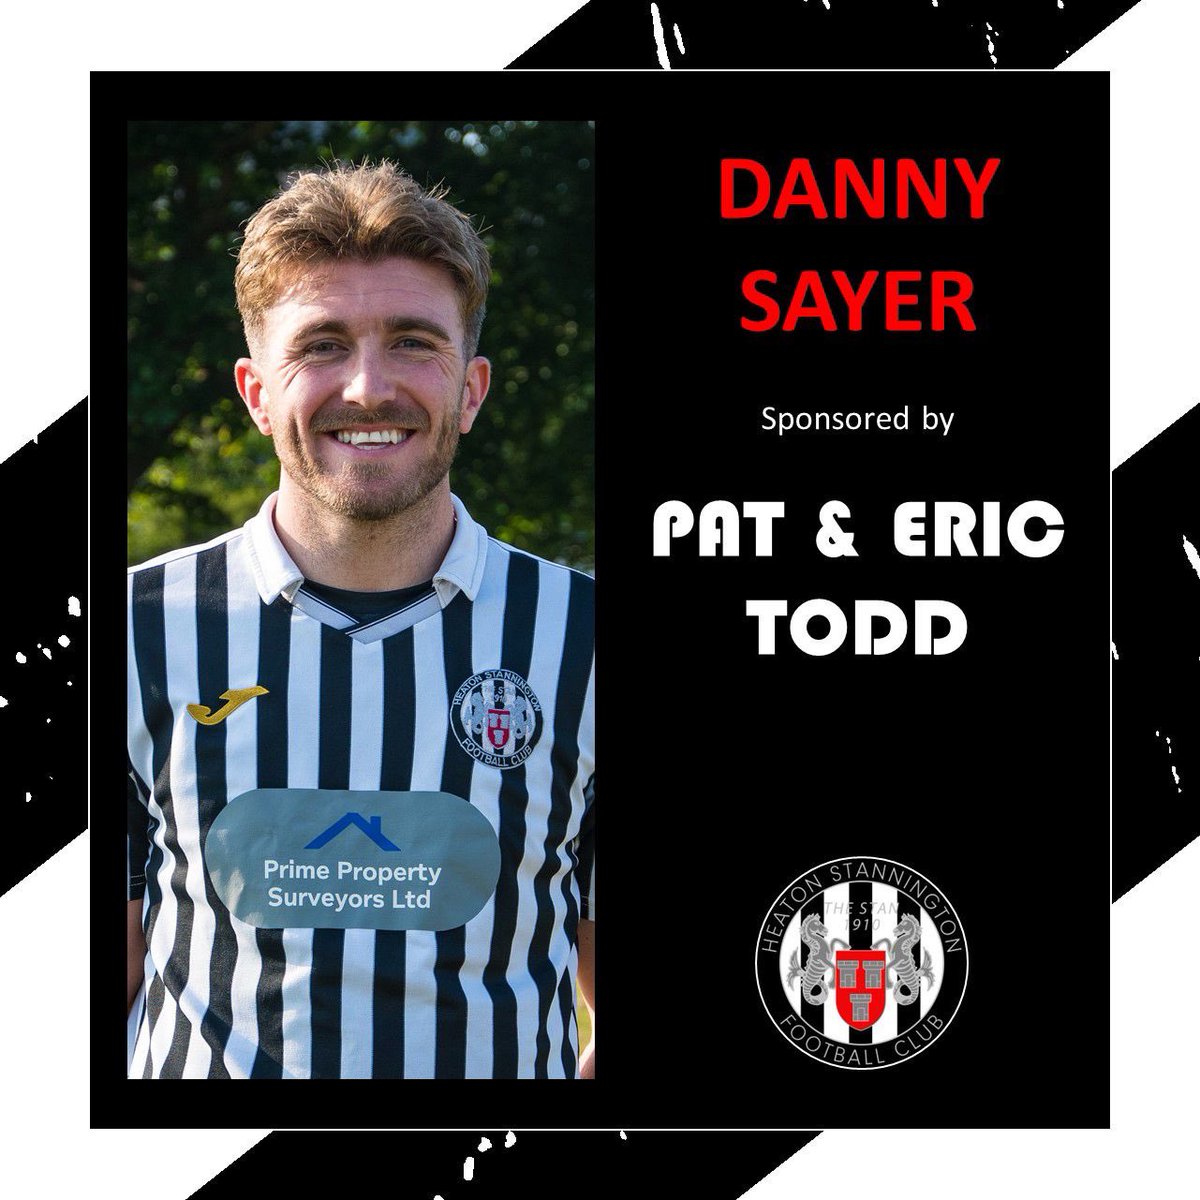 43’ SUB David Palmer has picked up an injury and is replaced by Danny Sayer. ⚫️0-0🔴